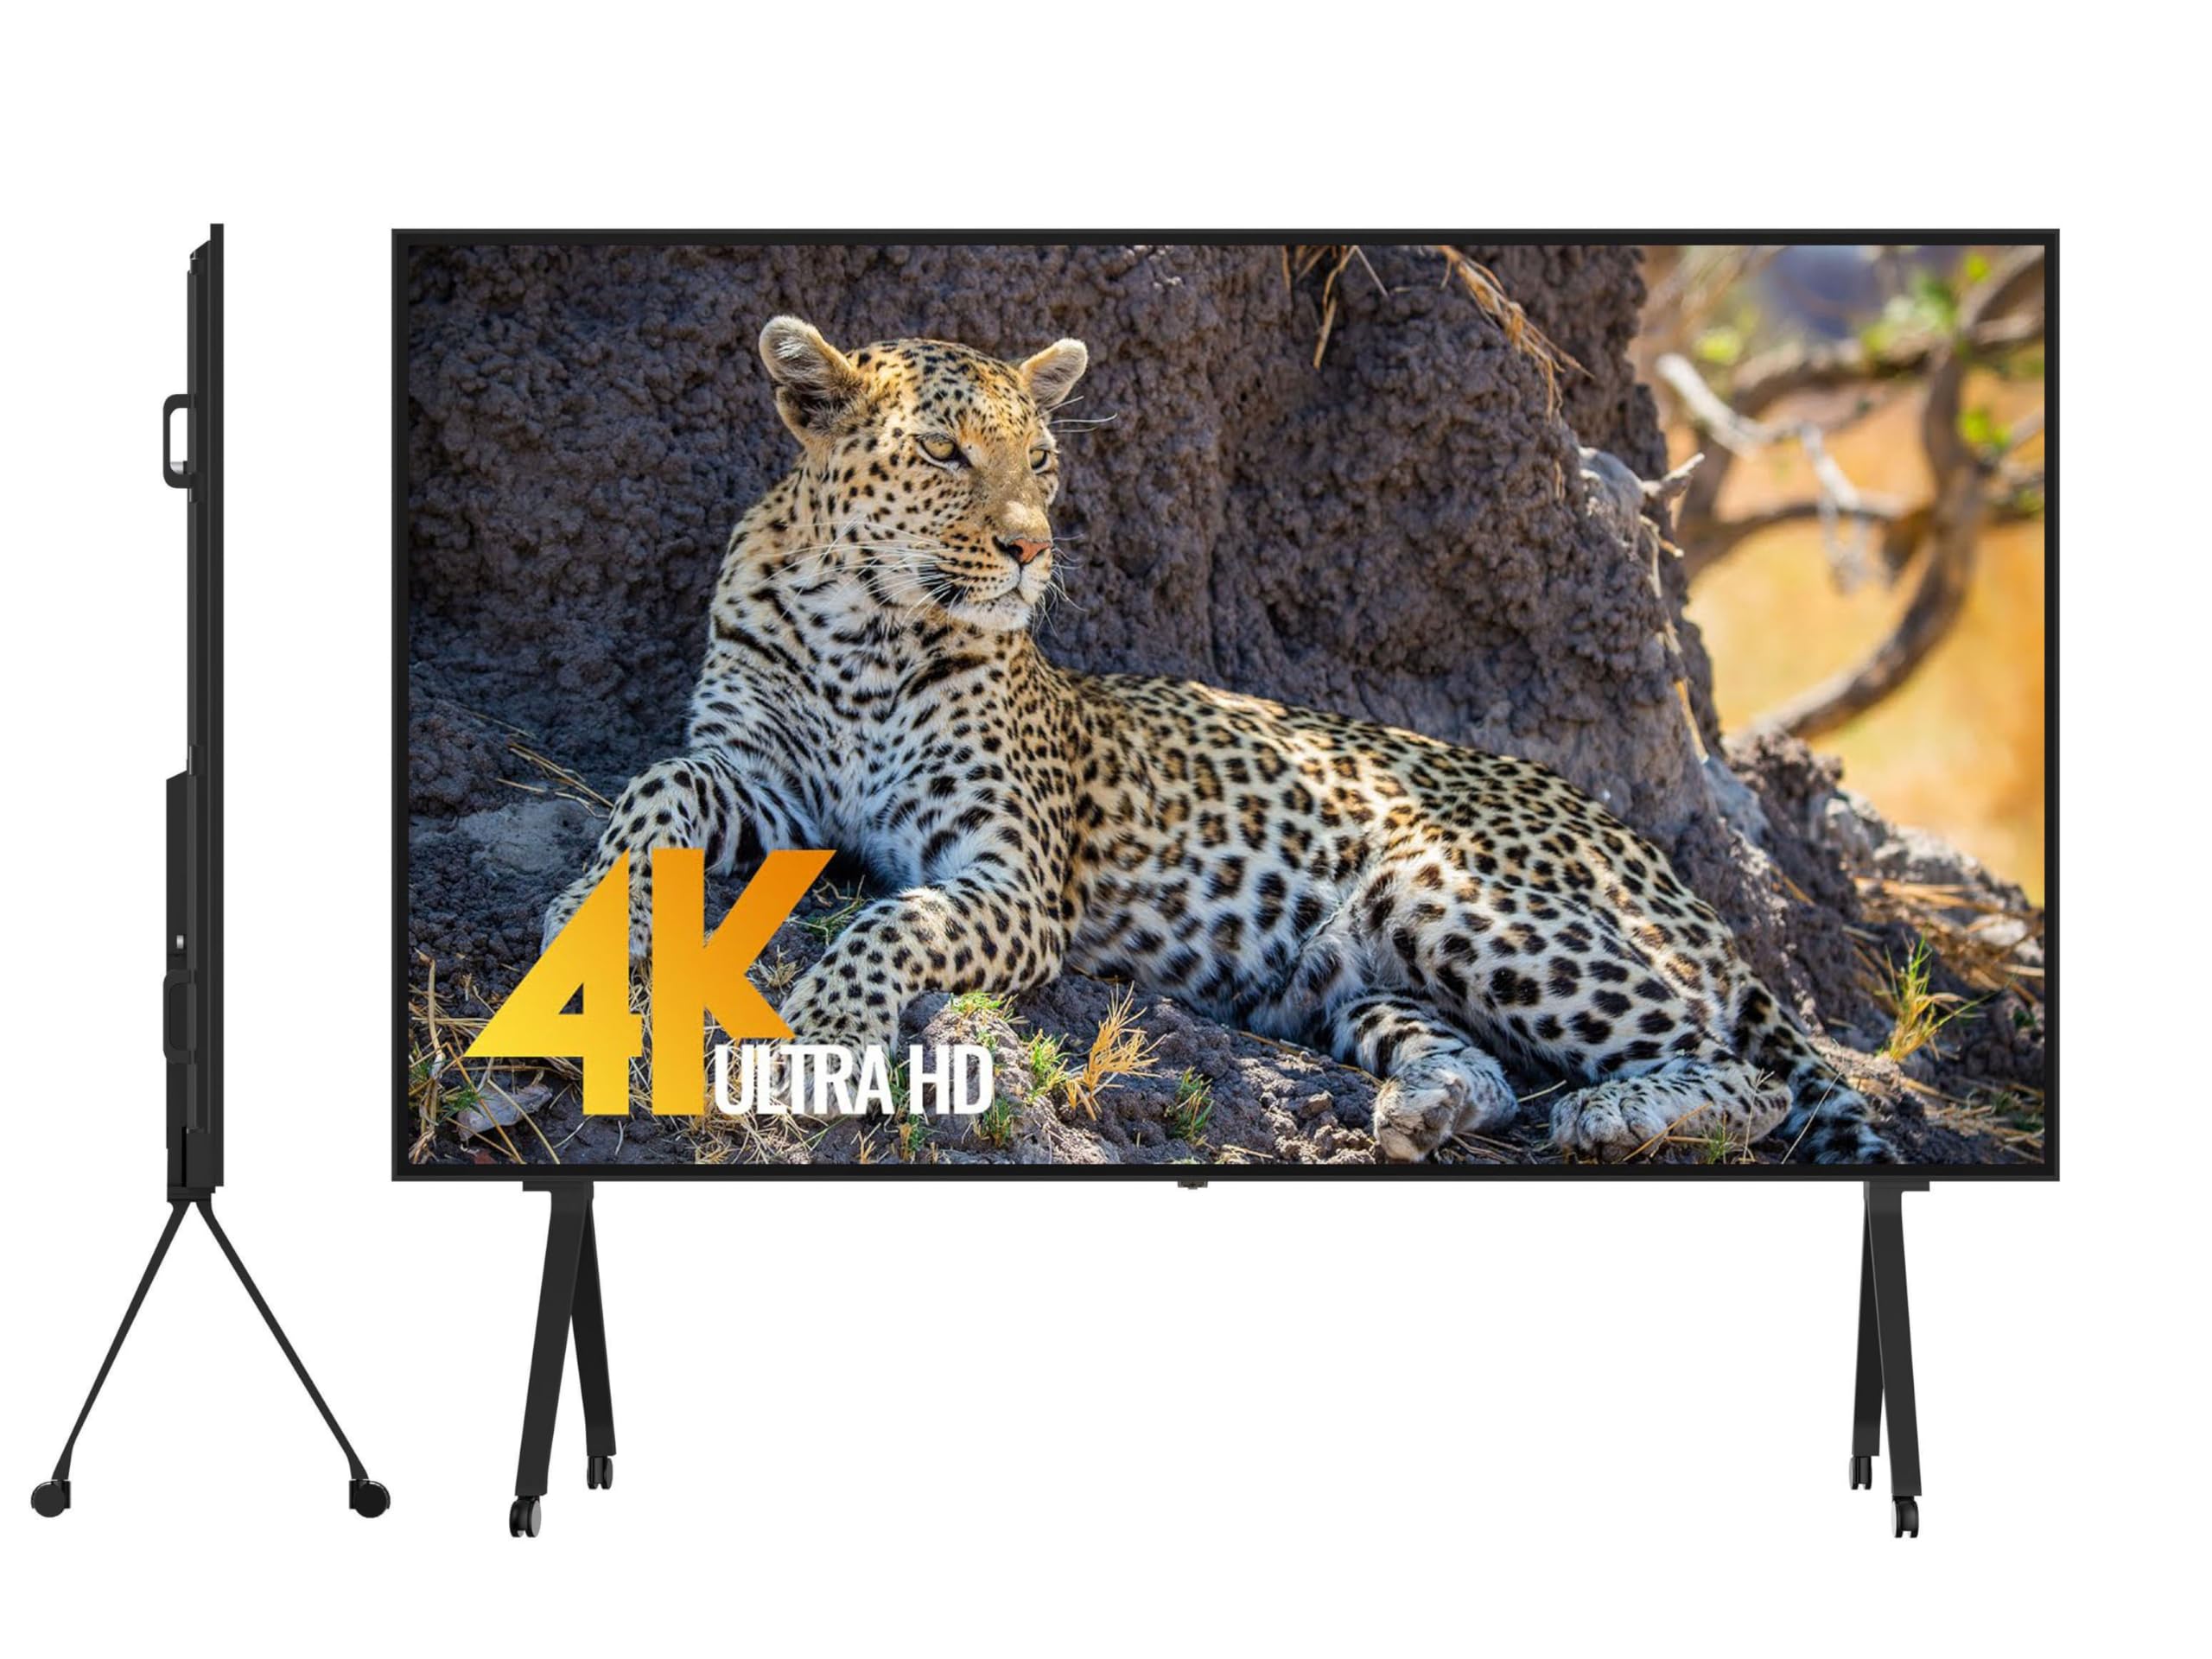 GTUOXIES 100 Inch LCD Panel 4K UHD Smart TV; TS100TD, High Brightness, High Contrast Makes Images Clearly Visible from A Distance